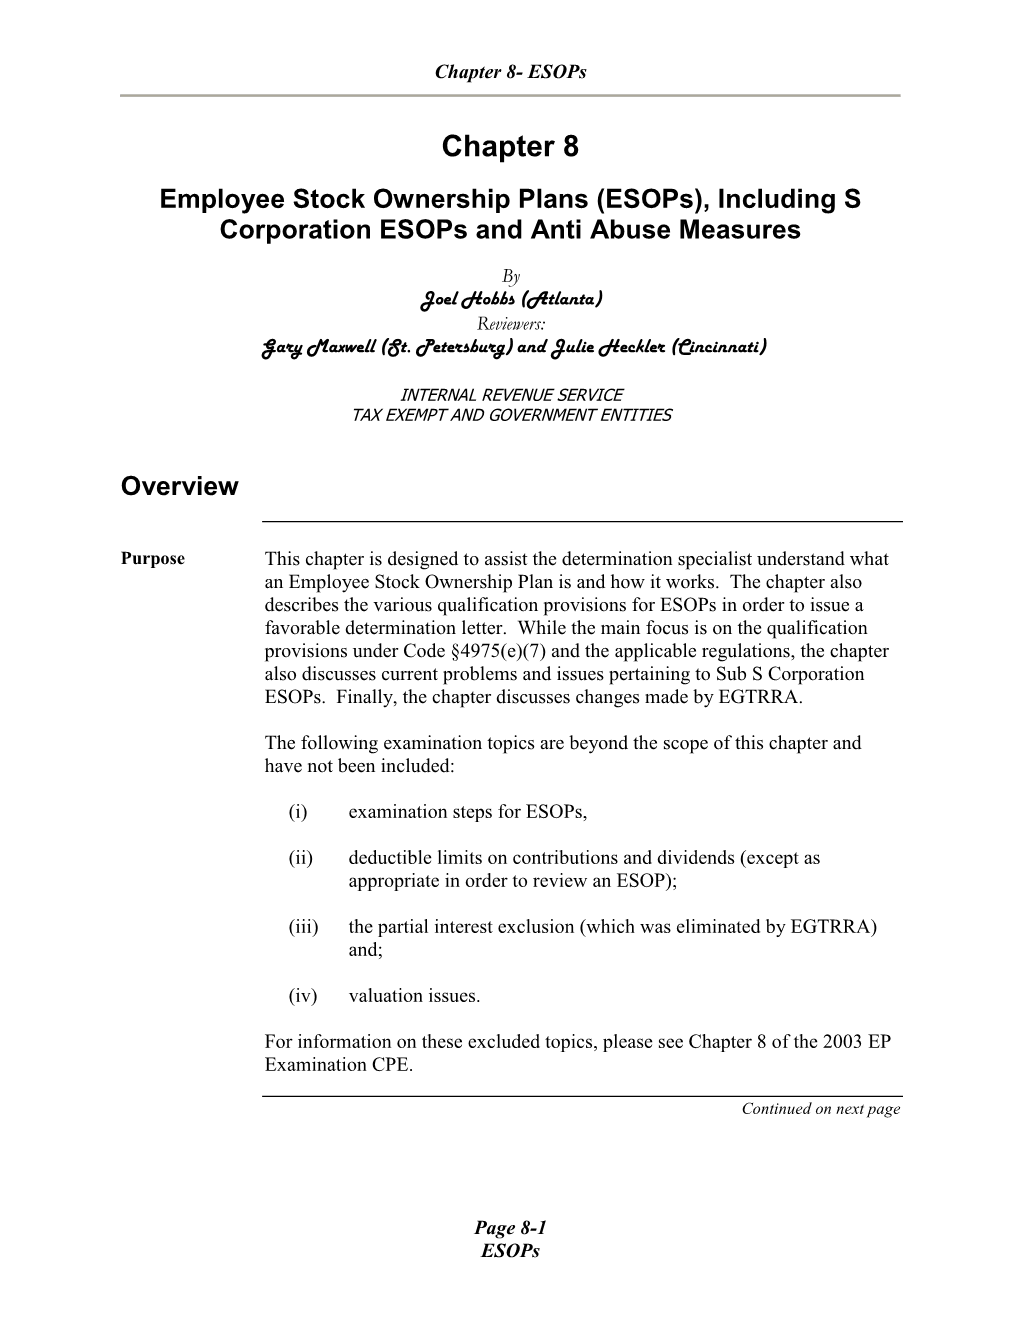 Employee Stock Ownership Plans (Esops), Including S Corporation Esops and Anti Abuse Measures